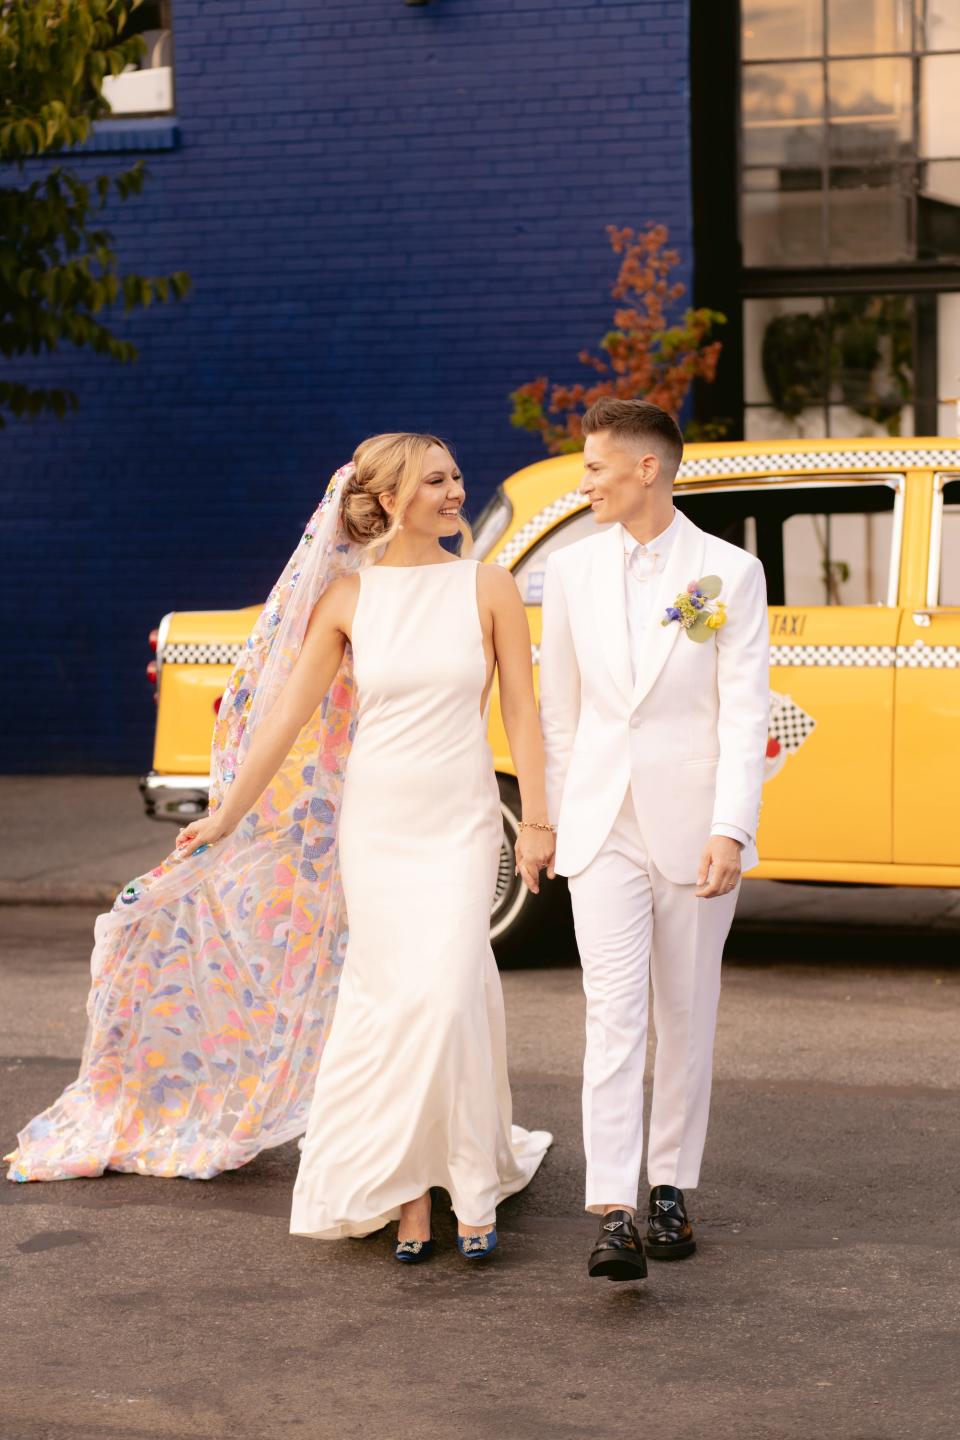 A bride in a white dress and rainbow veil and a bride in a white suit hold hands as they walk away from a yellow taxi.